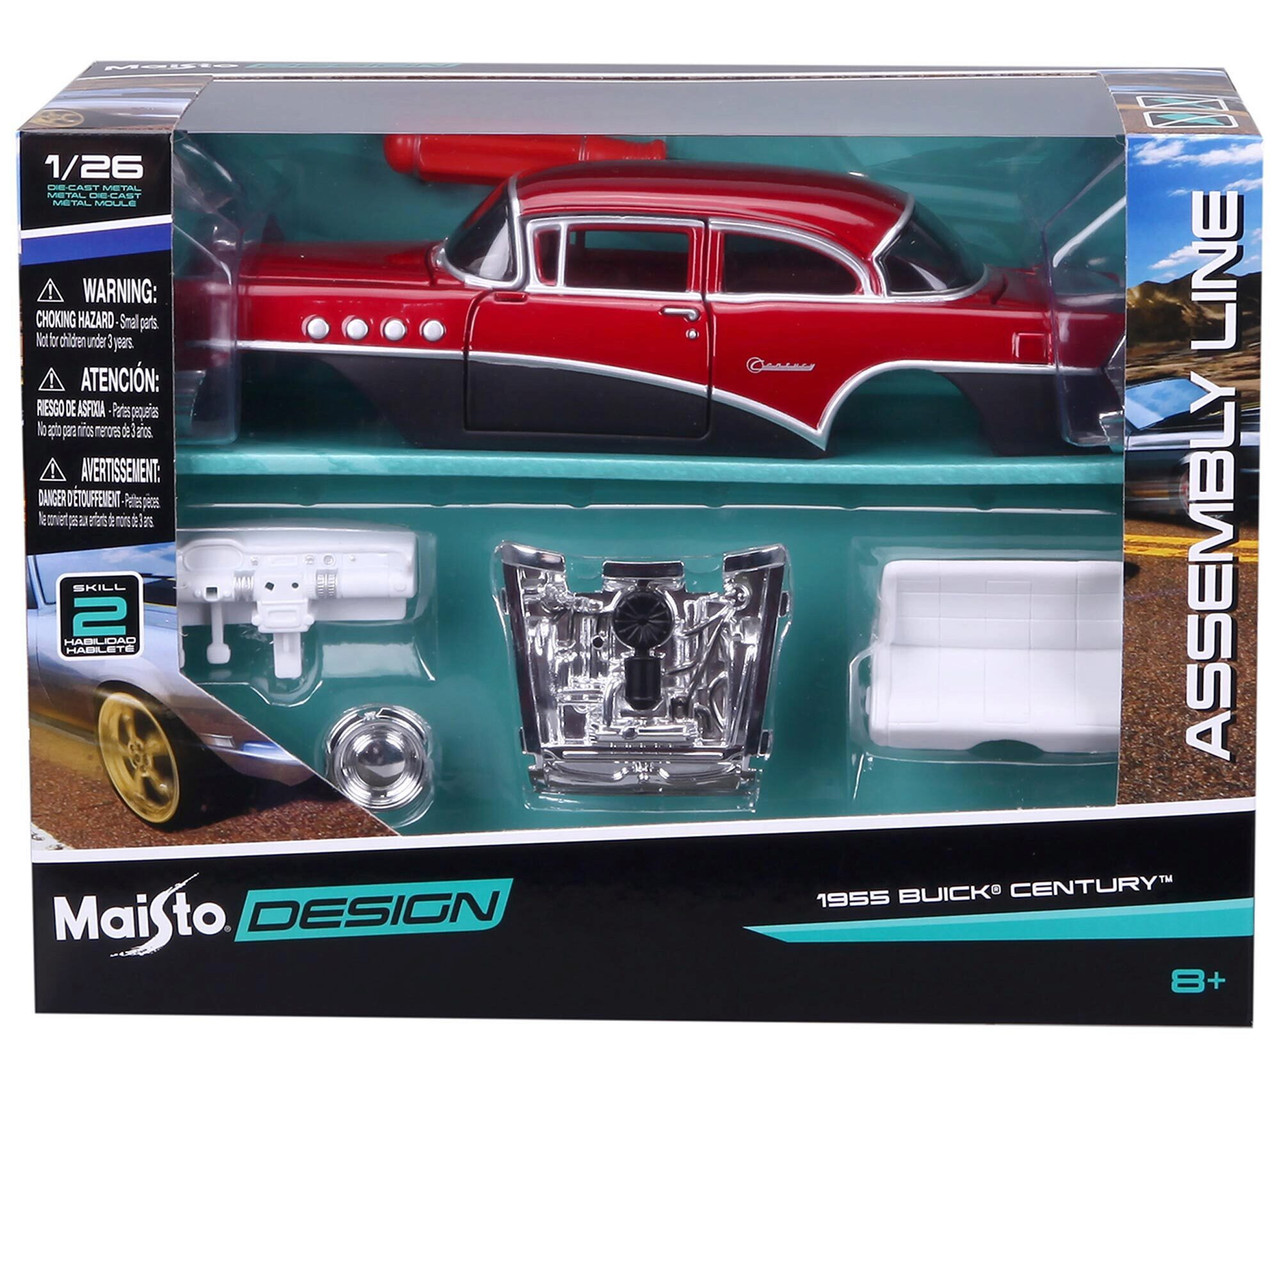 1955 Buick Century Assembly Line 1:26 Scale Diecast Model Kit by Maisto